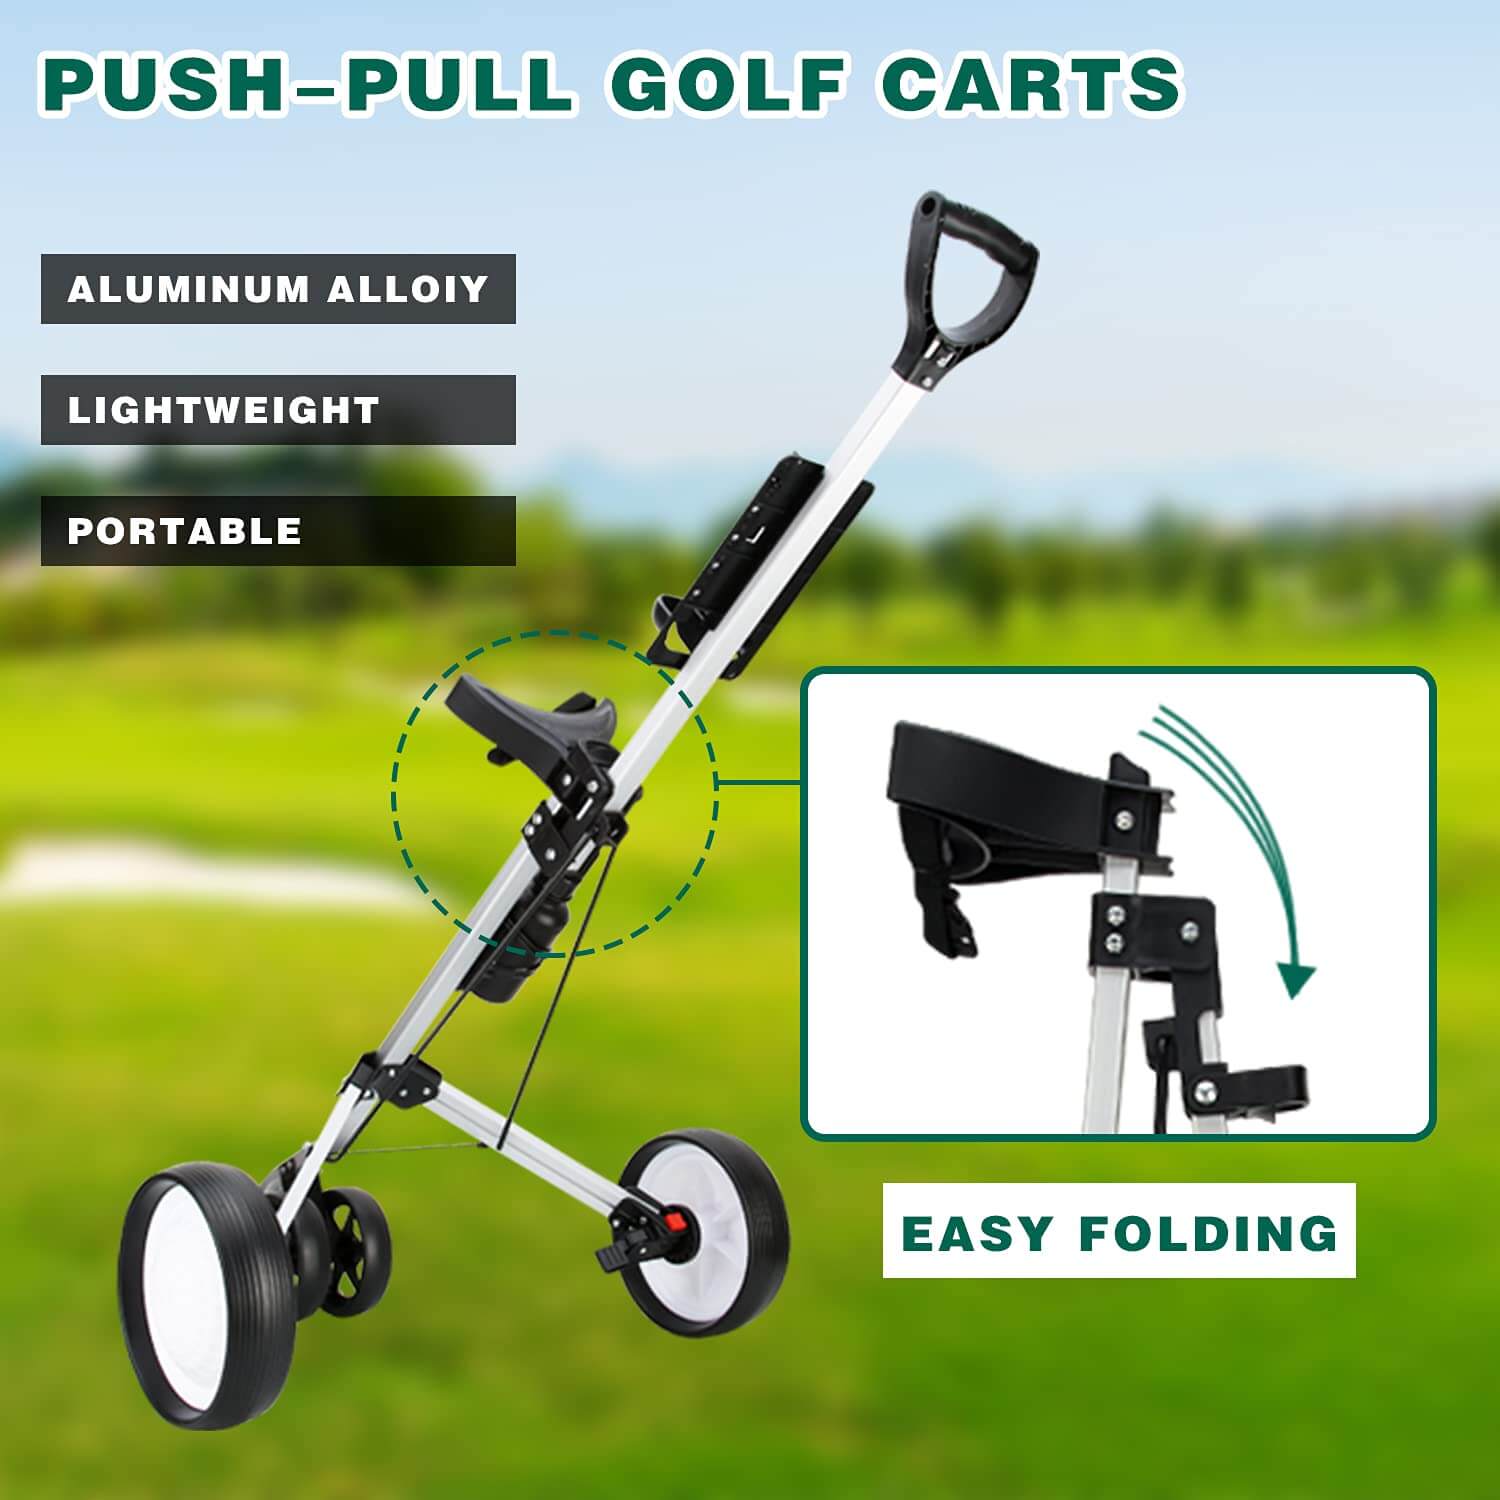 Golf Cart For Whole Sale  PGM Golf Push Cart with Push-Pull